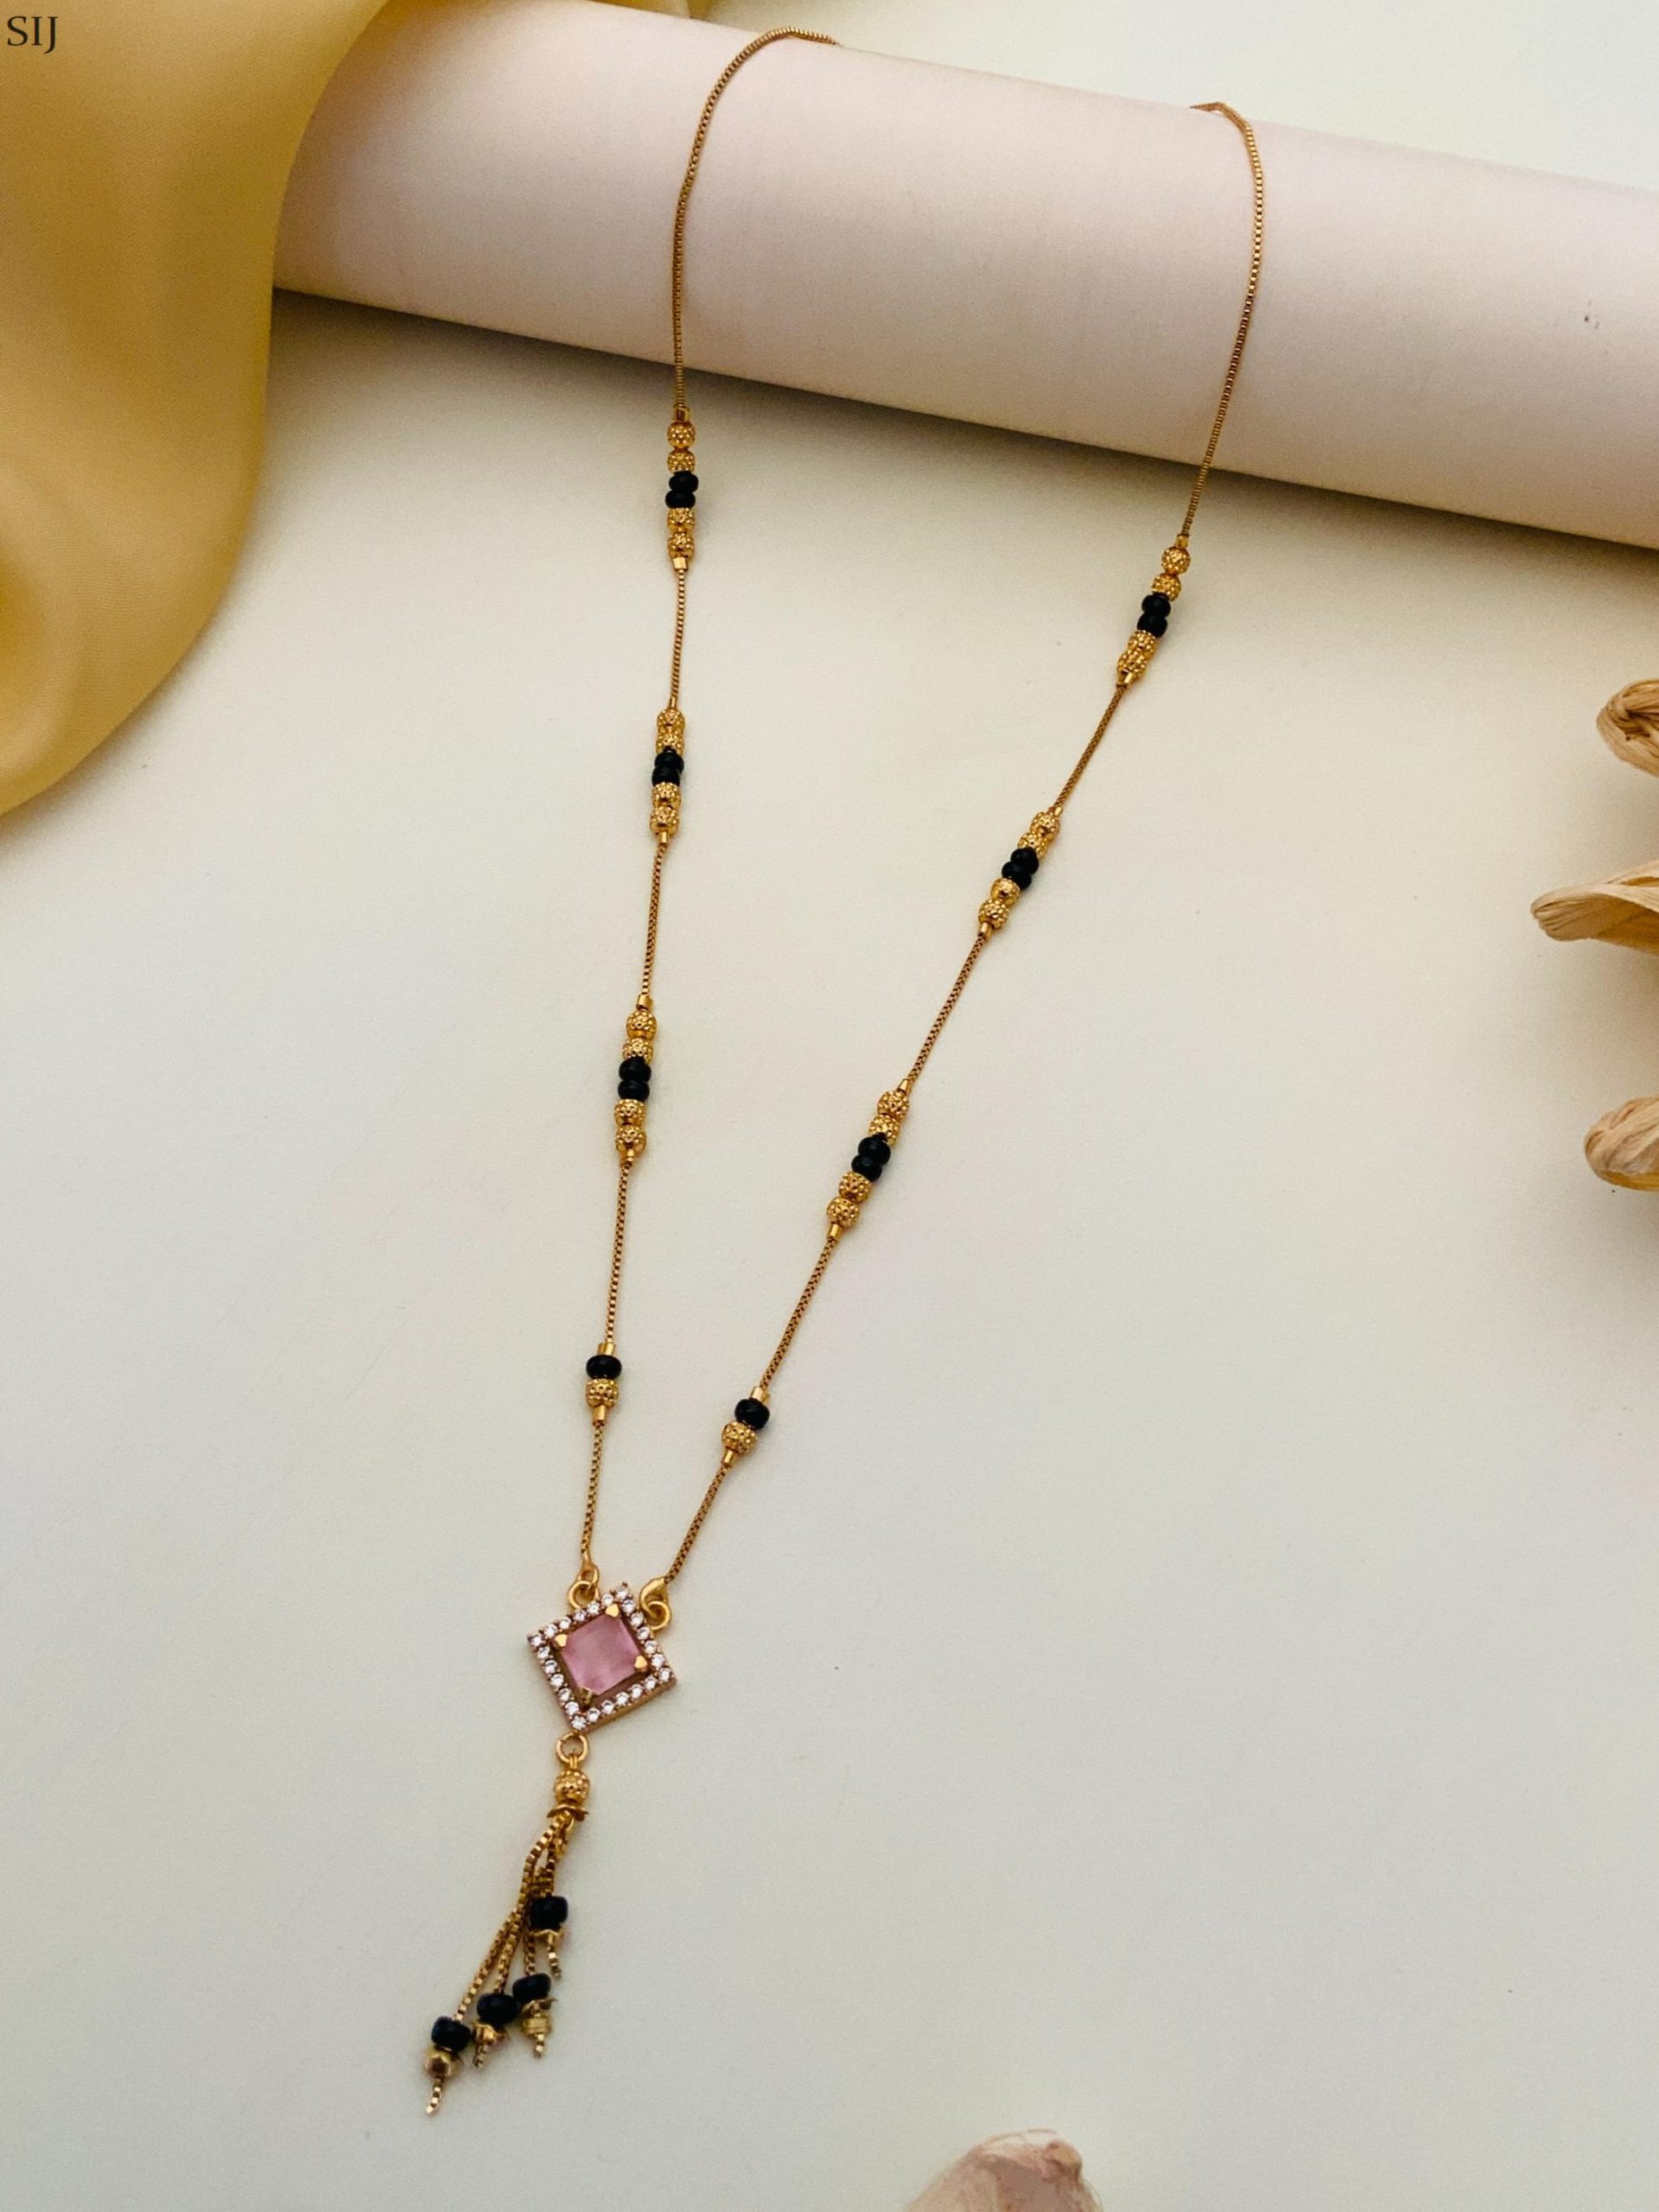 High Quality Fancy Gold Plated Mangalsutra